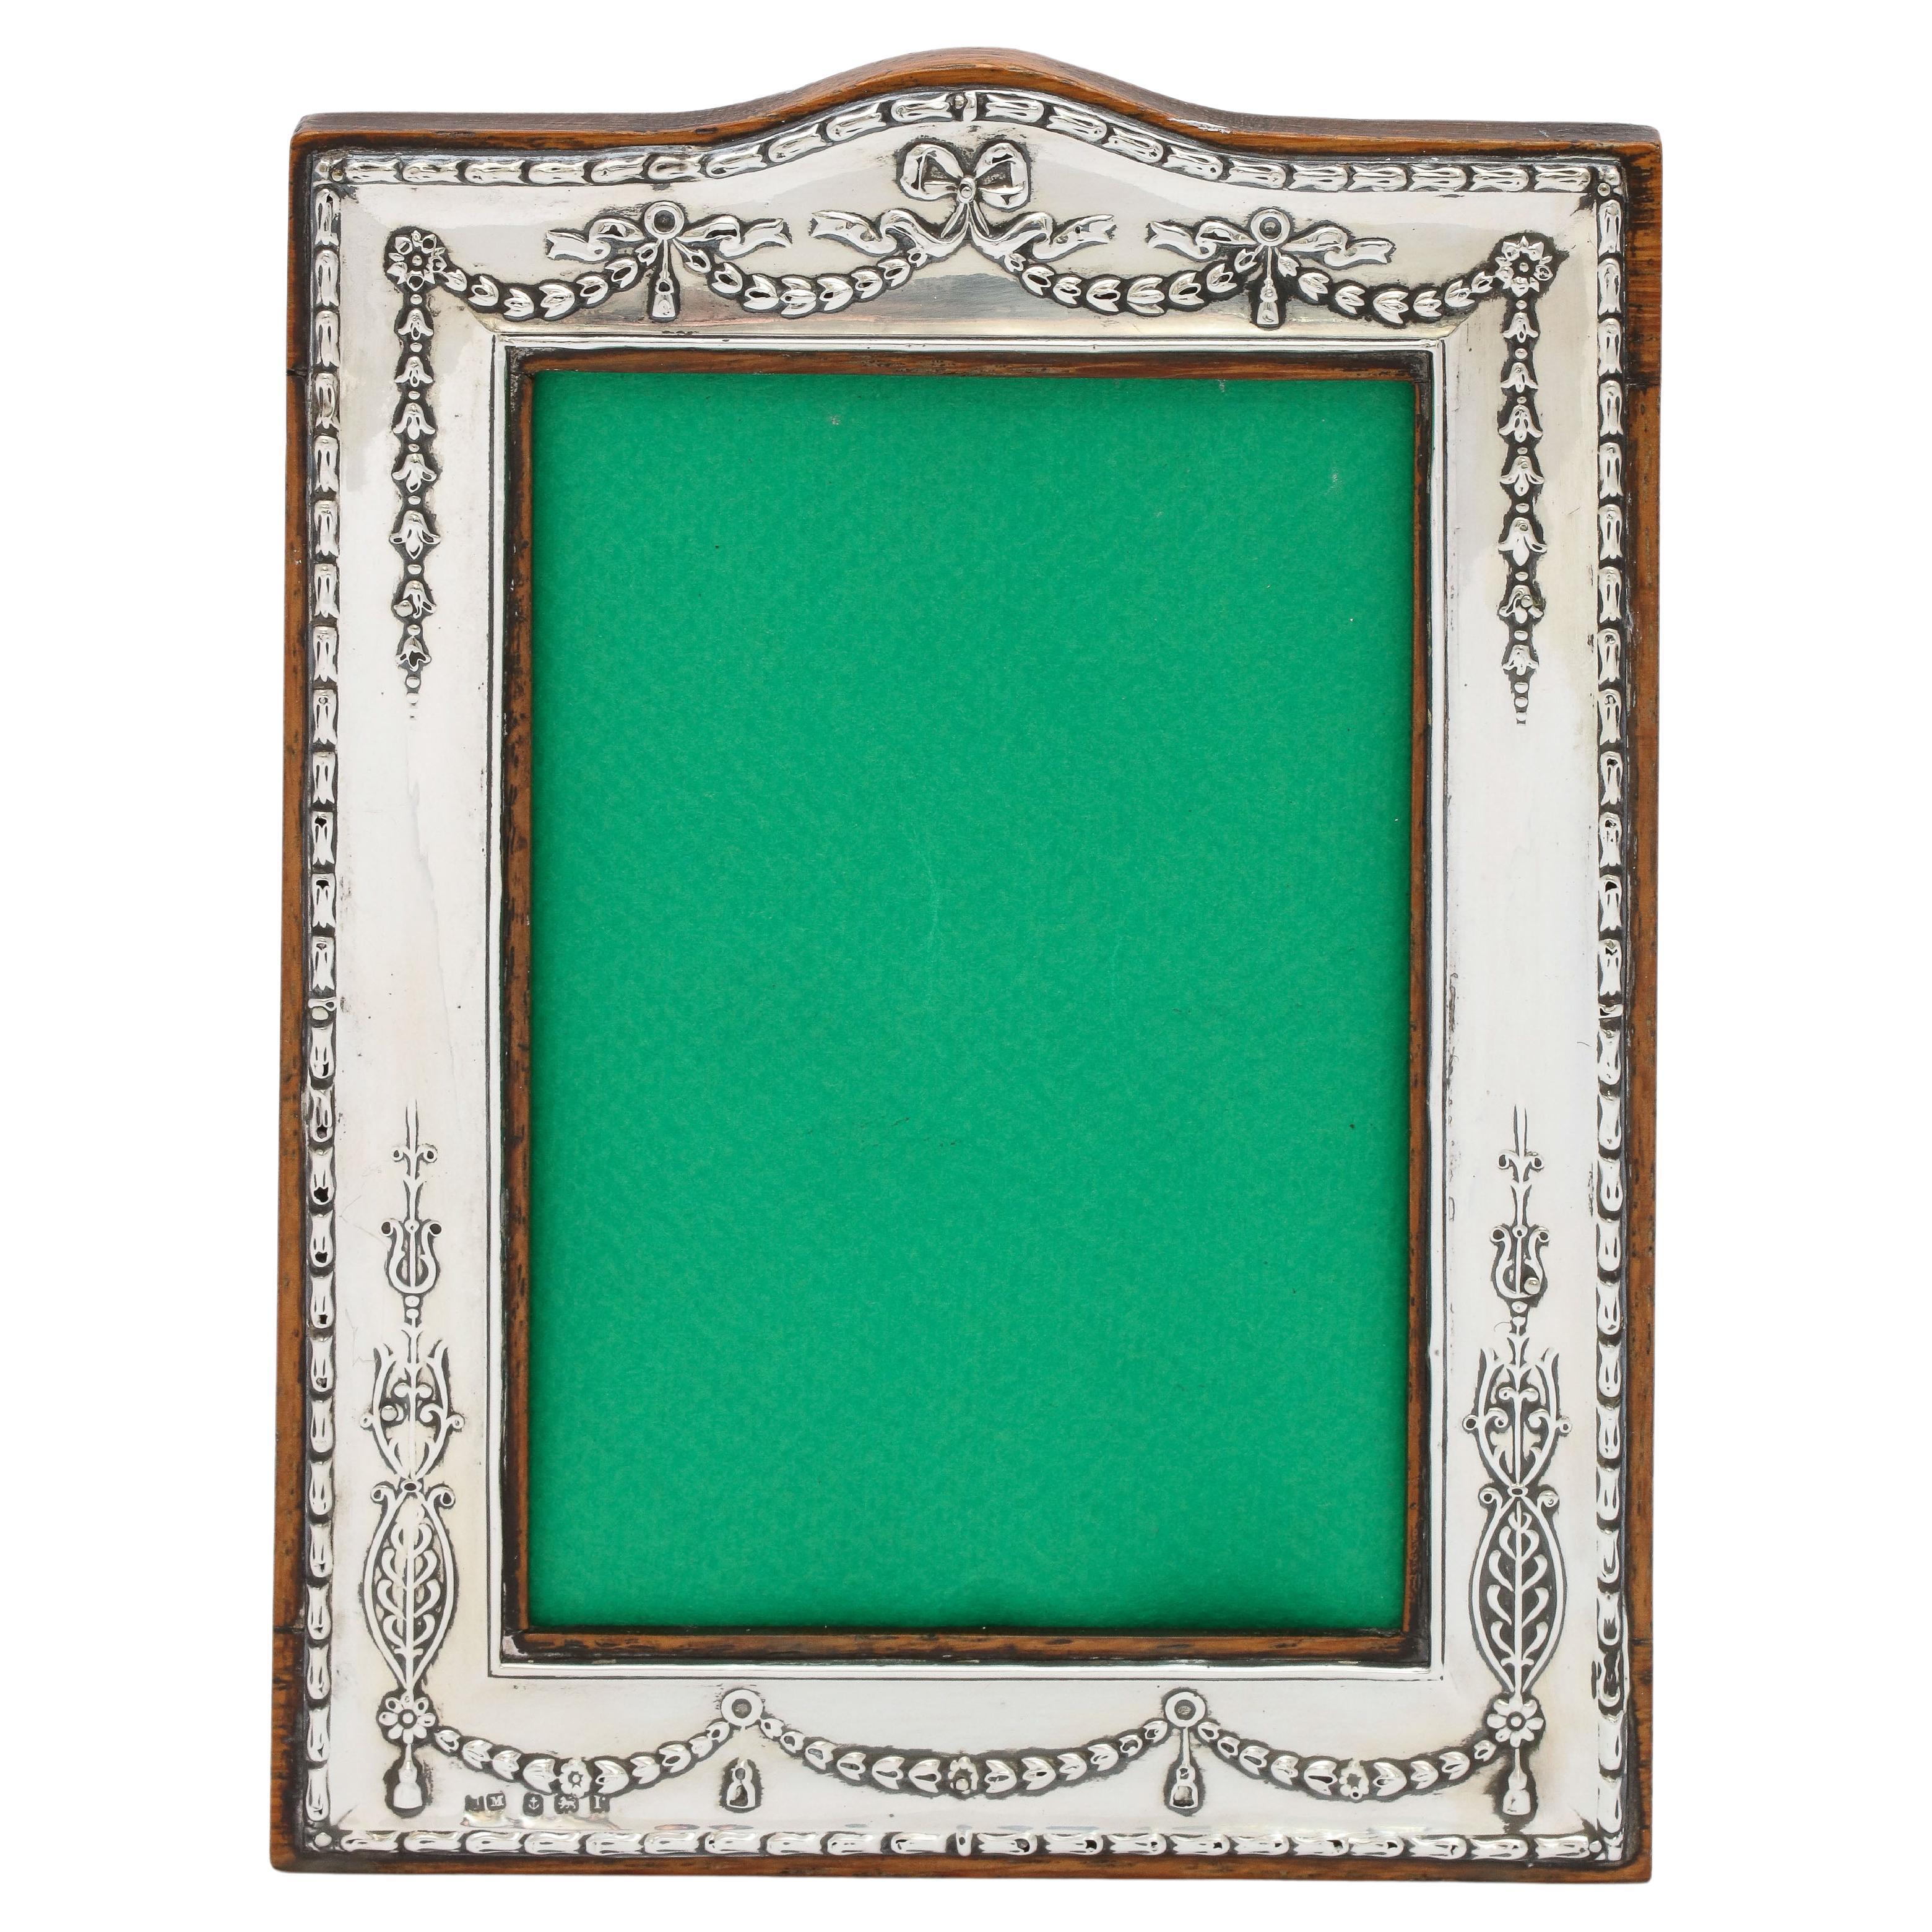 Edwardian Sterling Silver Picture Frame with Wood Back